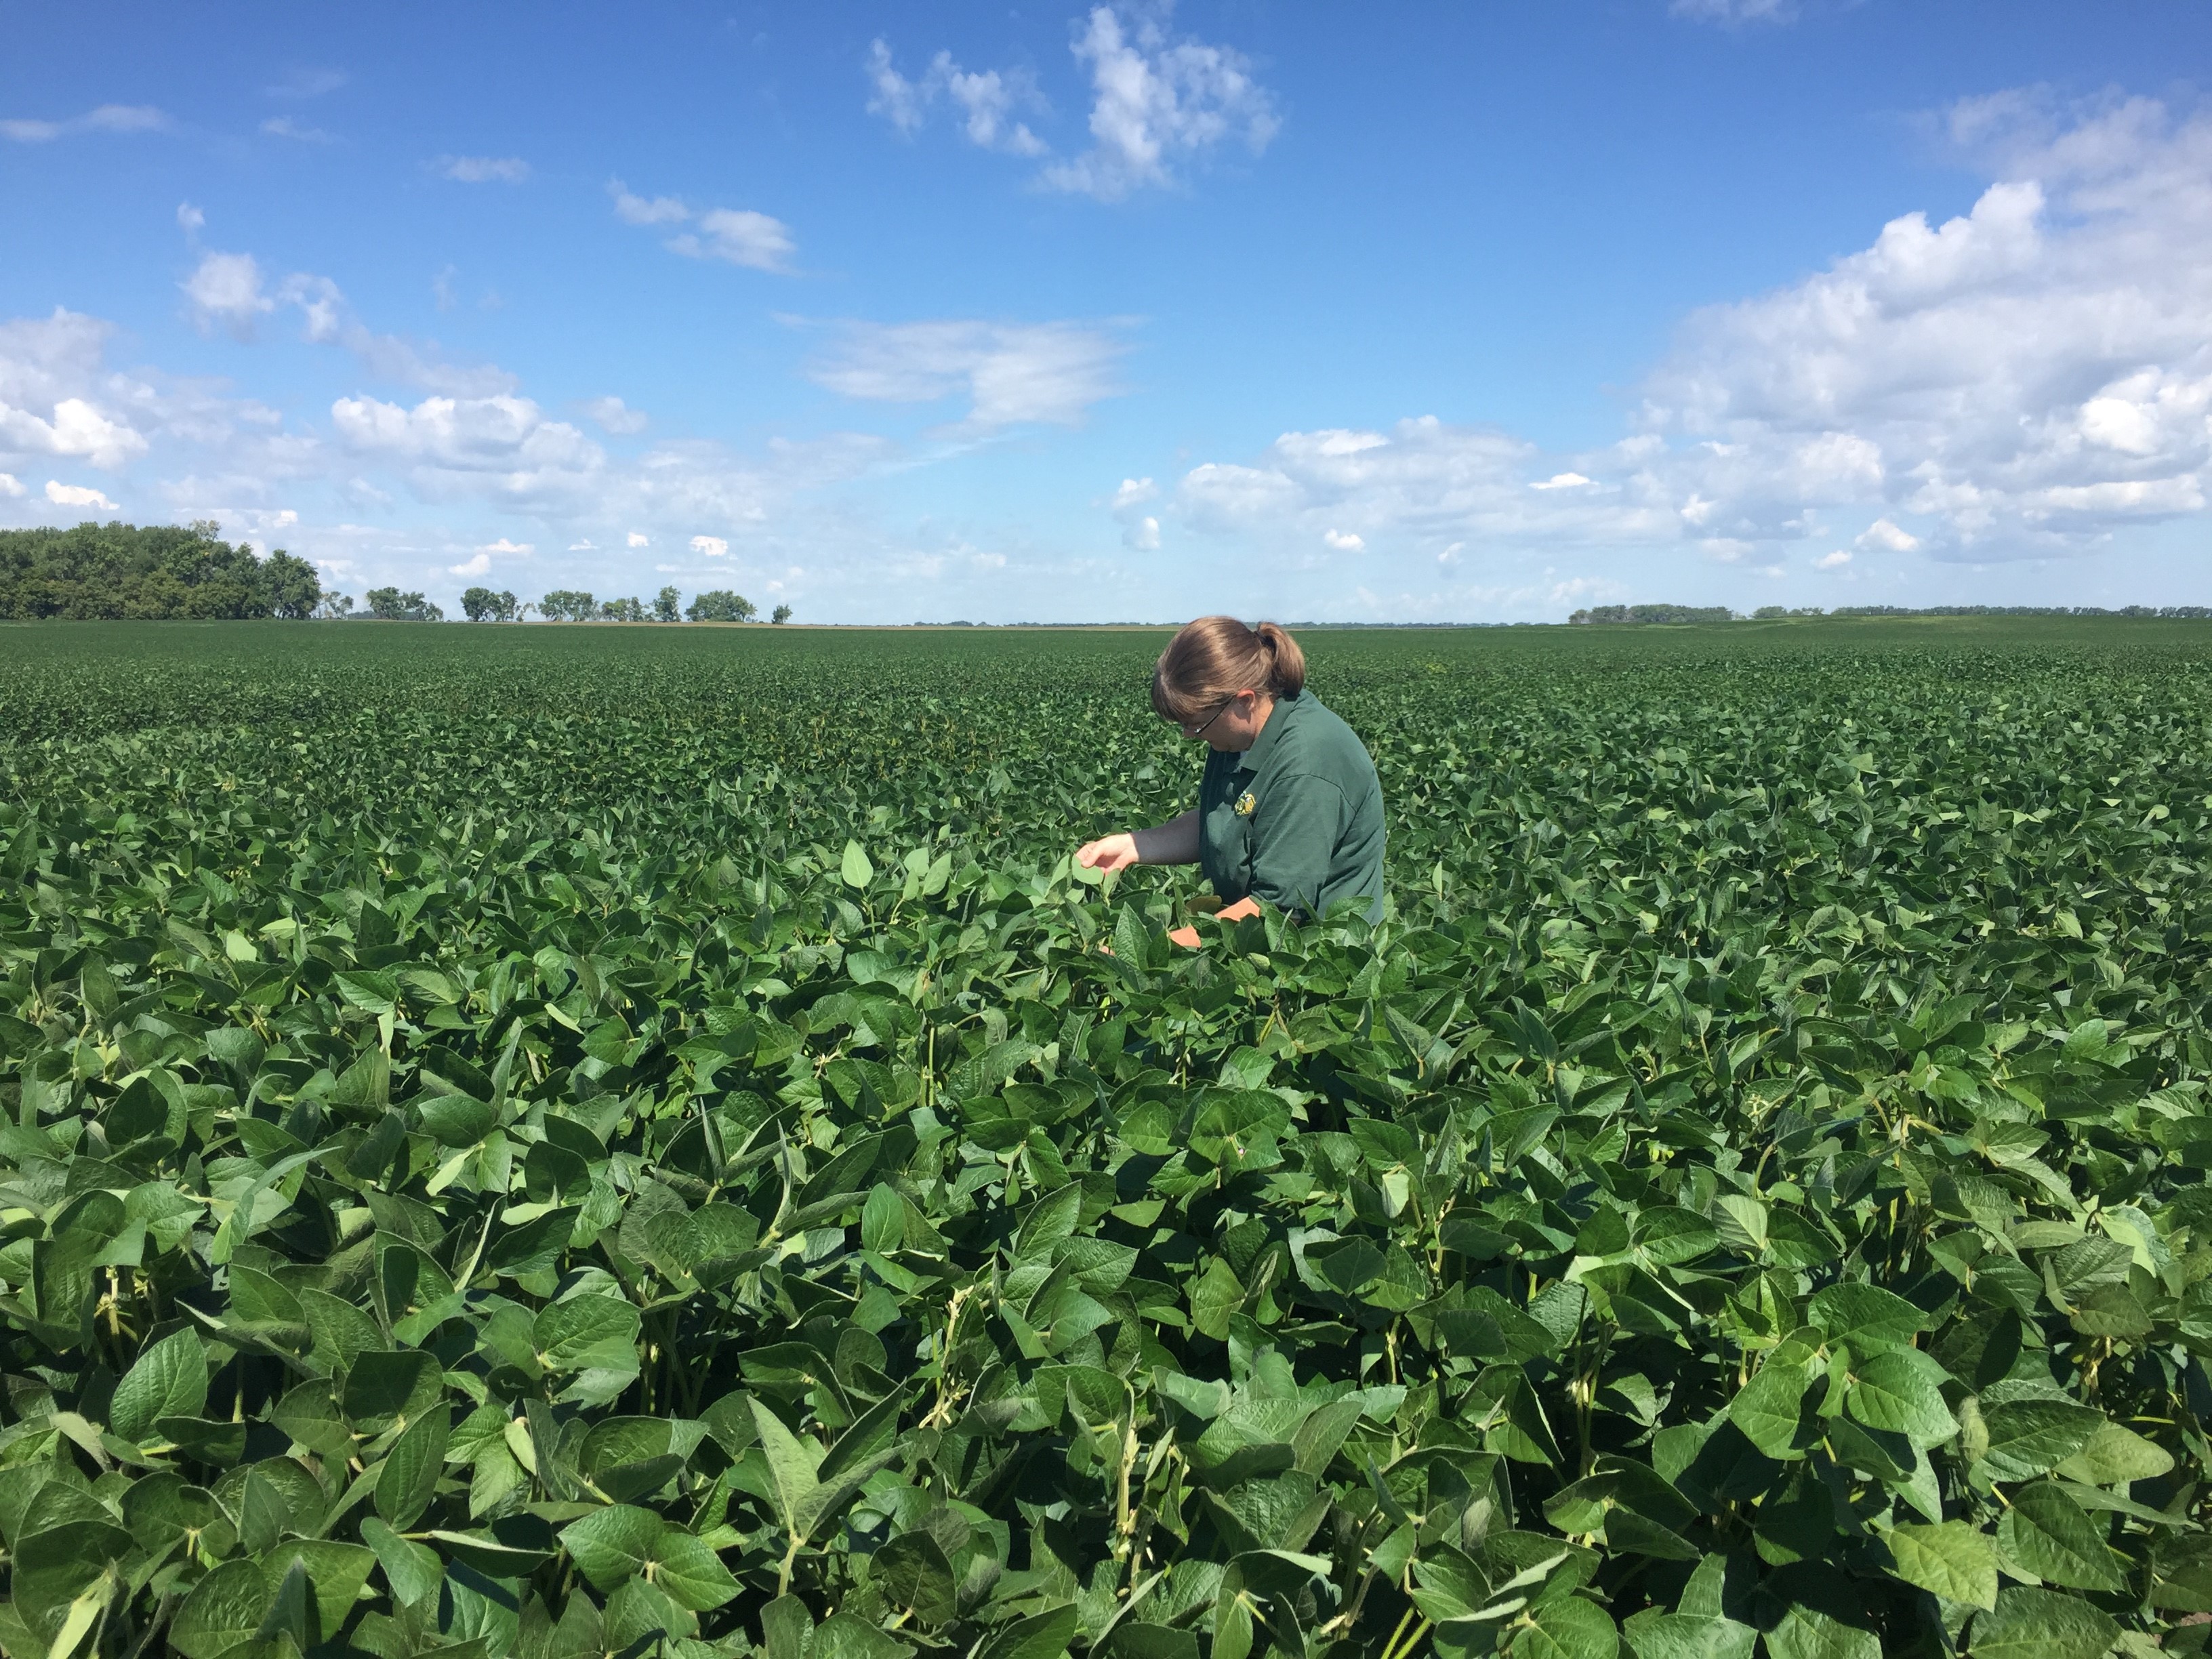 Angie Johnson, an agent in NDSU Extension’s Steele County office, uses knowledge she gained at the North Central Agriculture and Natural Resources Academy to assess the overall health of a soybean field and scout for aphids and other insects. (NDSU photo)